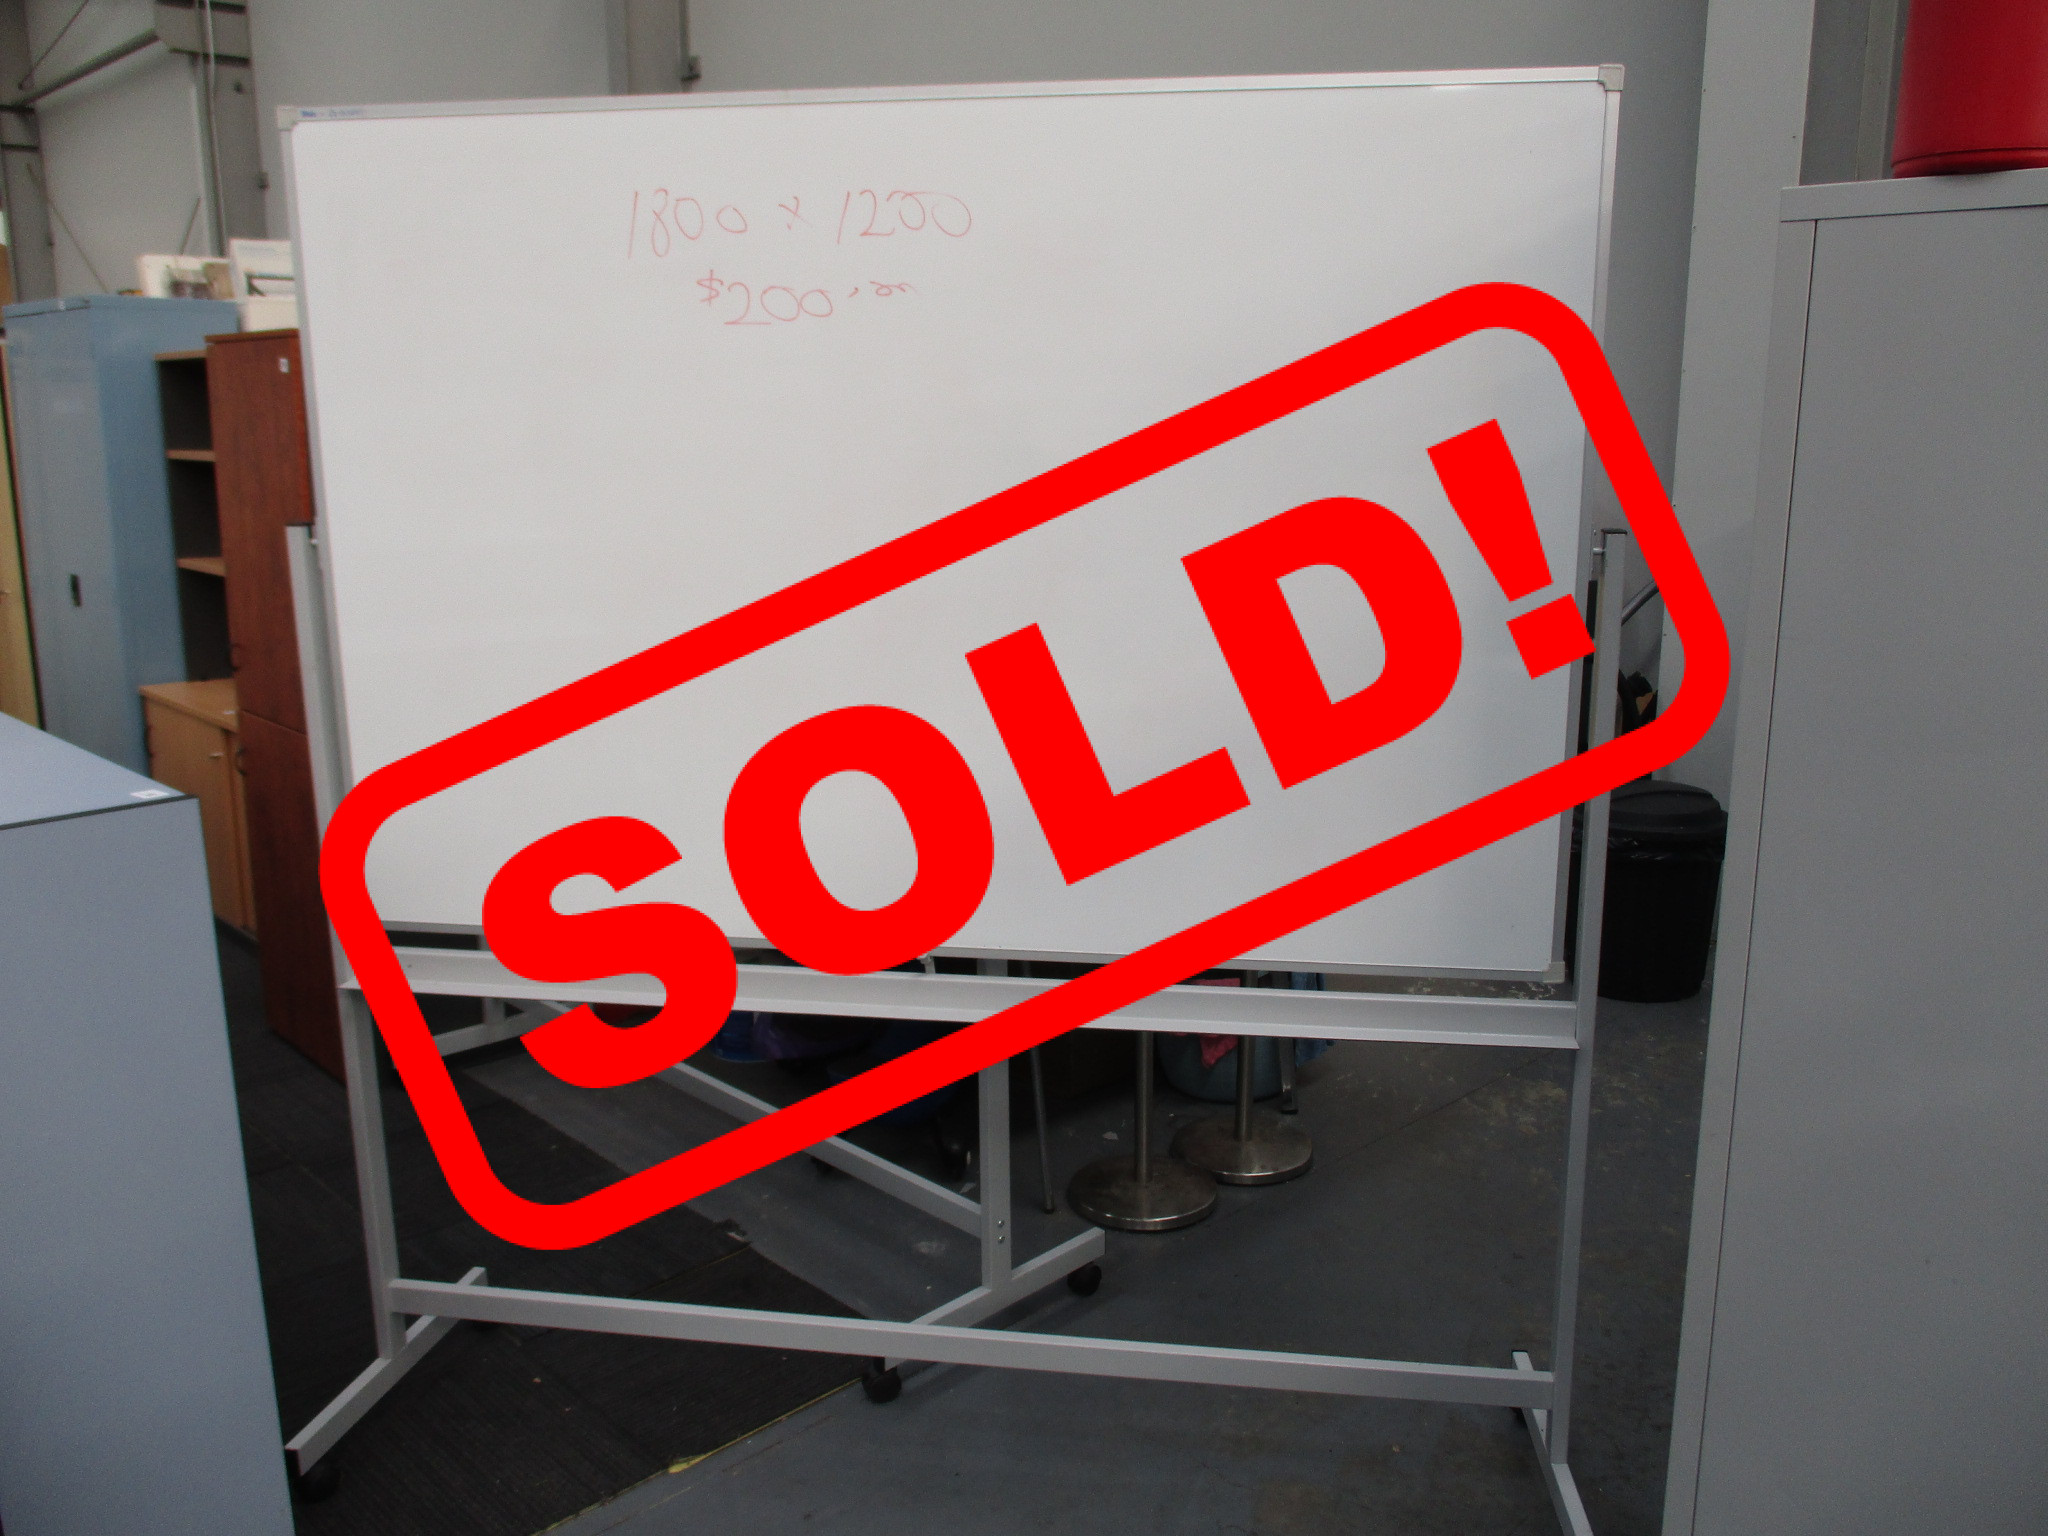 Mobile Whiteboards 1800×1200 $200